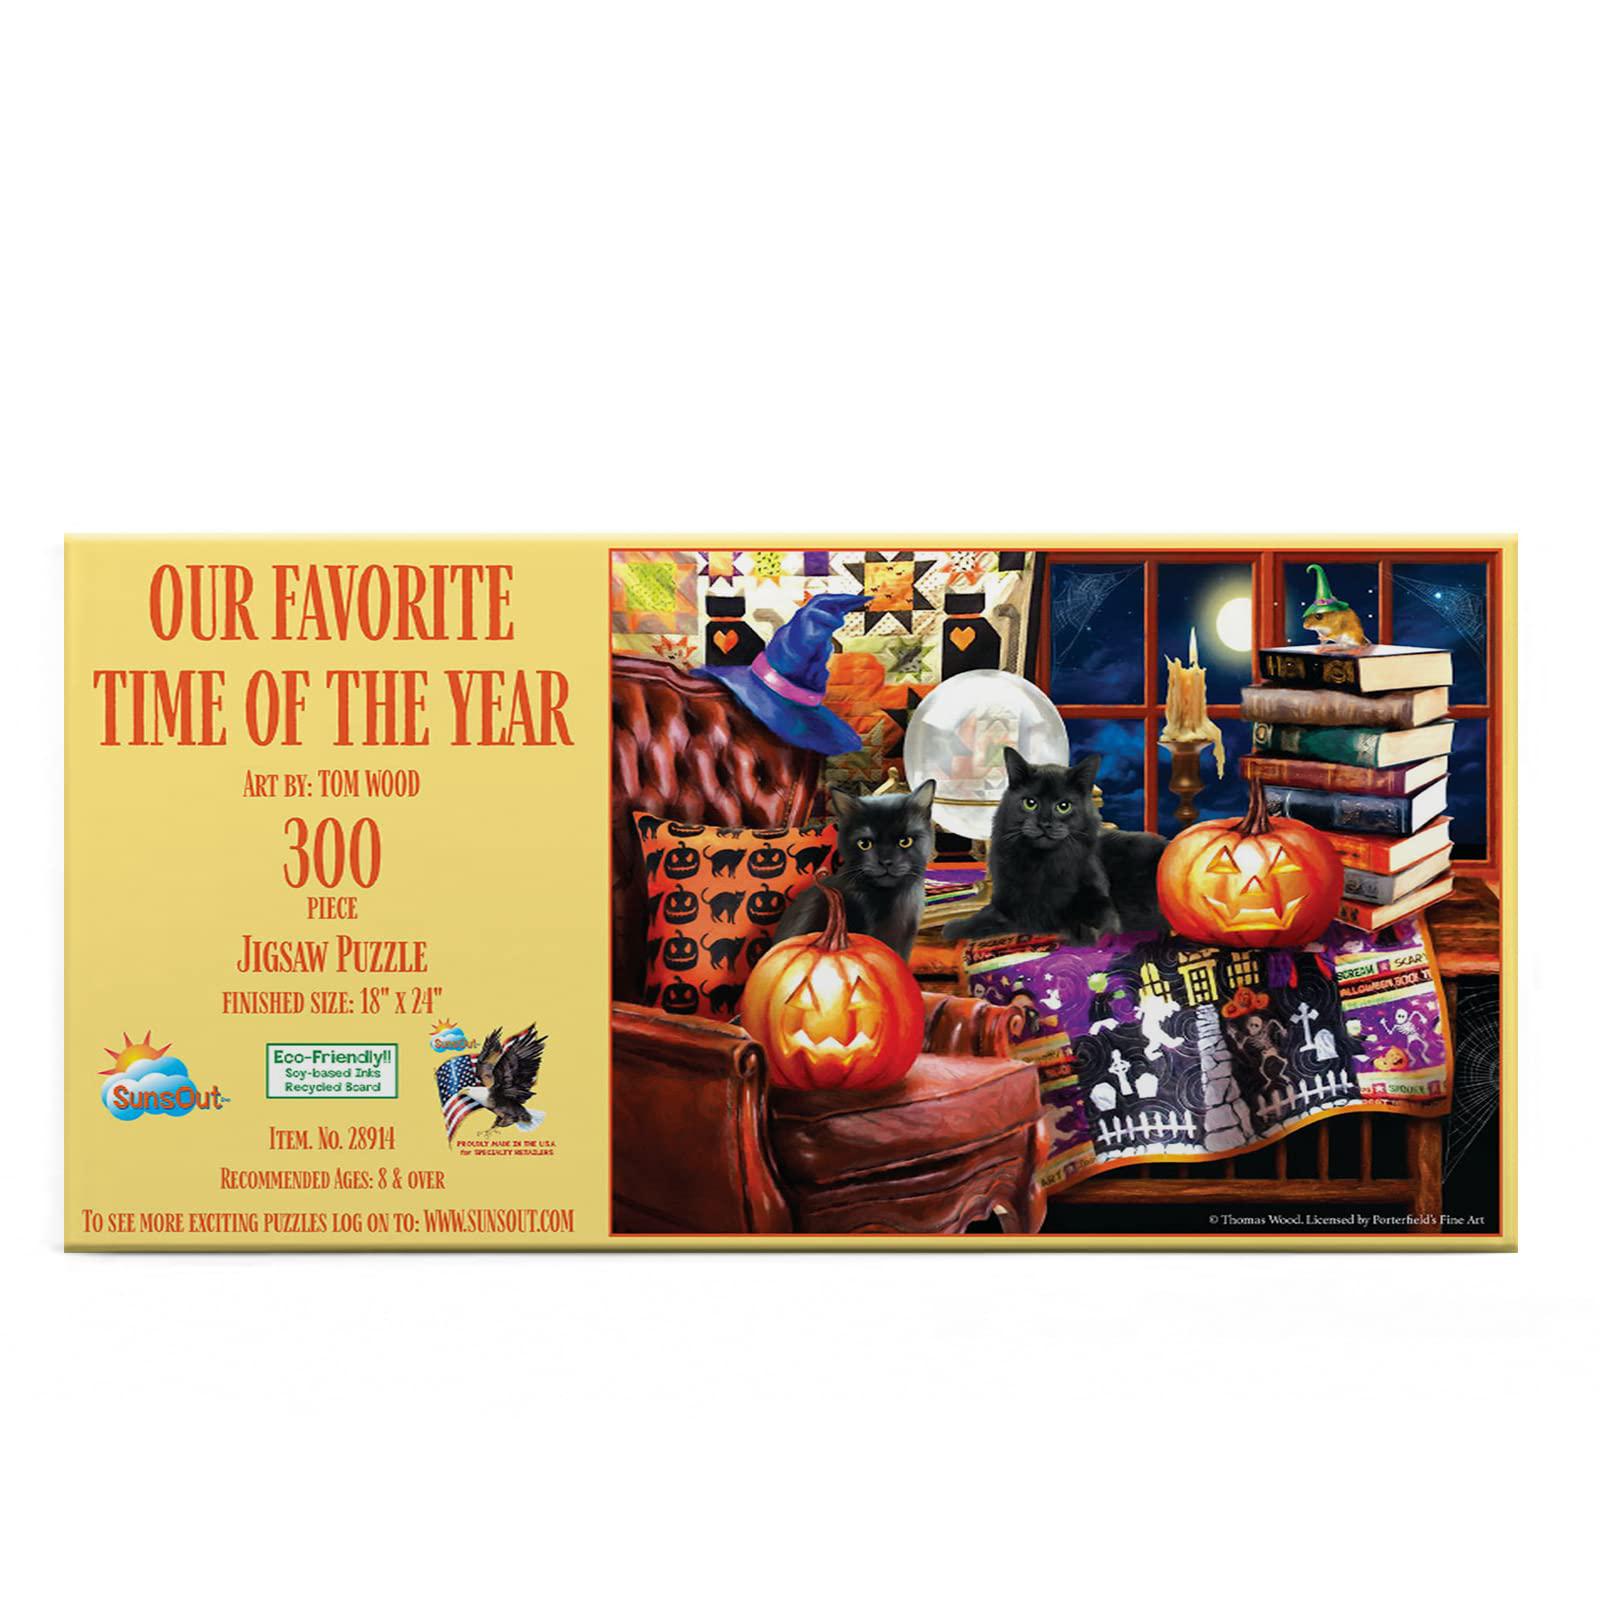 sunsout inc - our favorite time of the year - 300 pc jigsaw puzzle by artist: tom wood - finished size 18" x 24" halloween - 